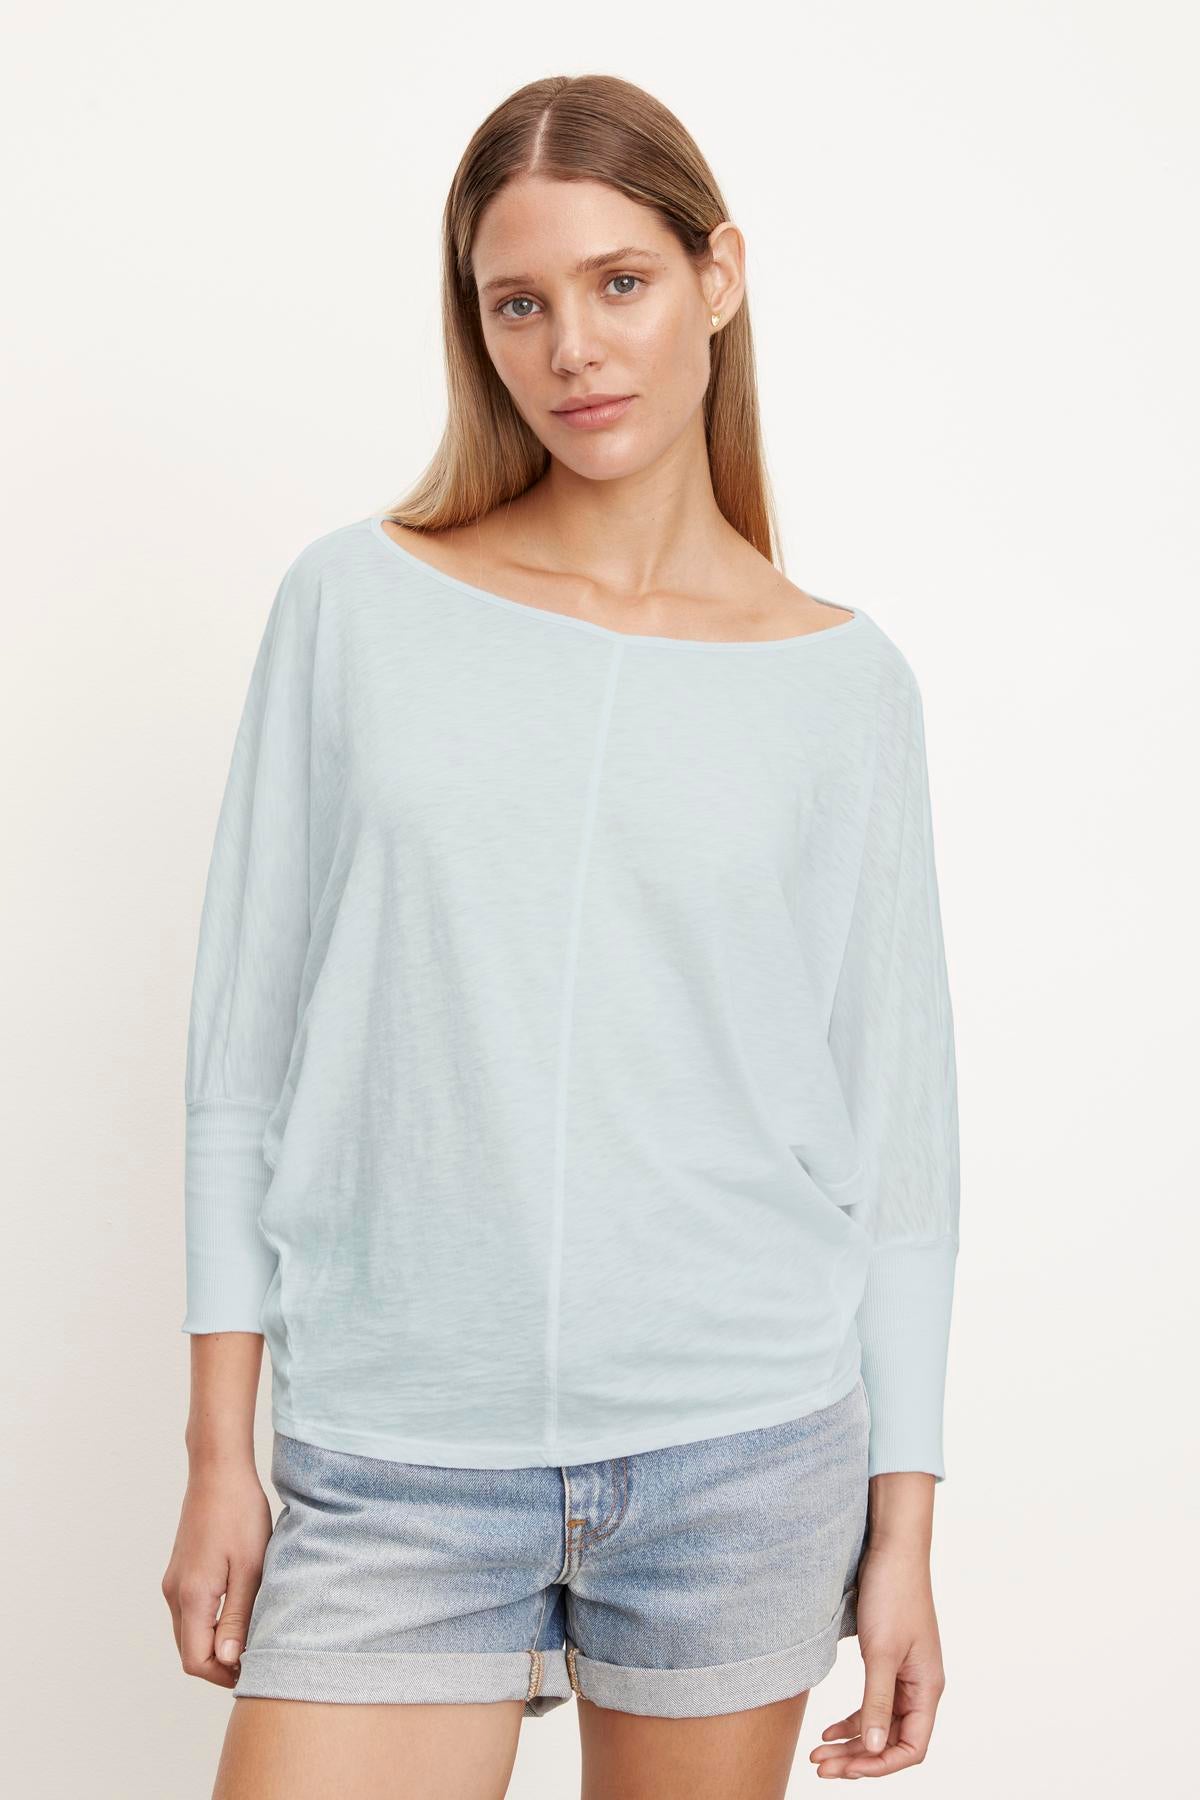 Woman with long brown hair wearing a light blue, slightly cropped JOSS DOLMAN SLEEVE TEE by Velvet by Graham & Spencer and denim shorts, standing in front of a plain white background.-37249861550273